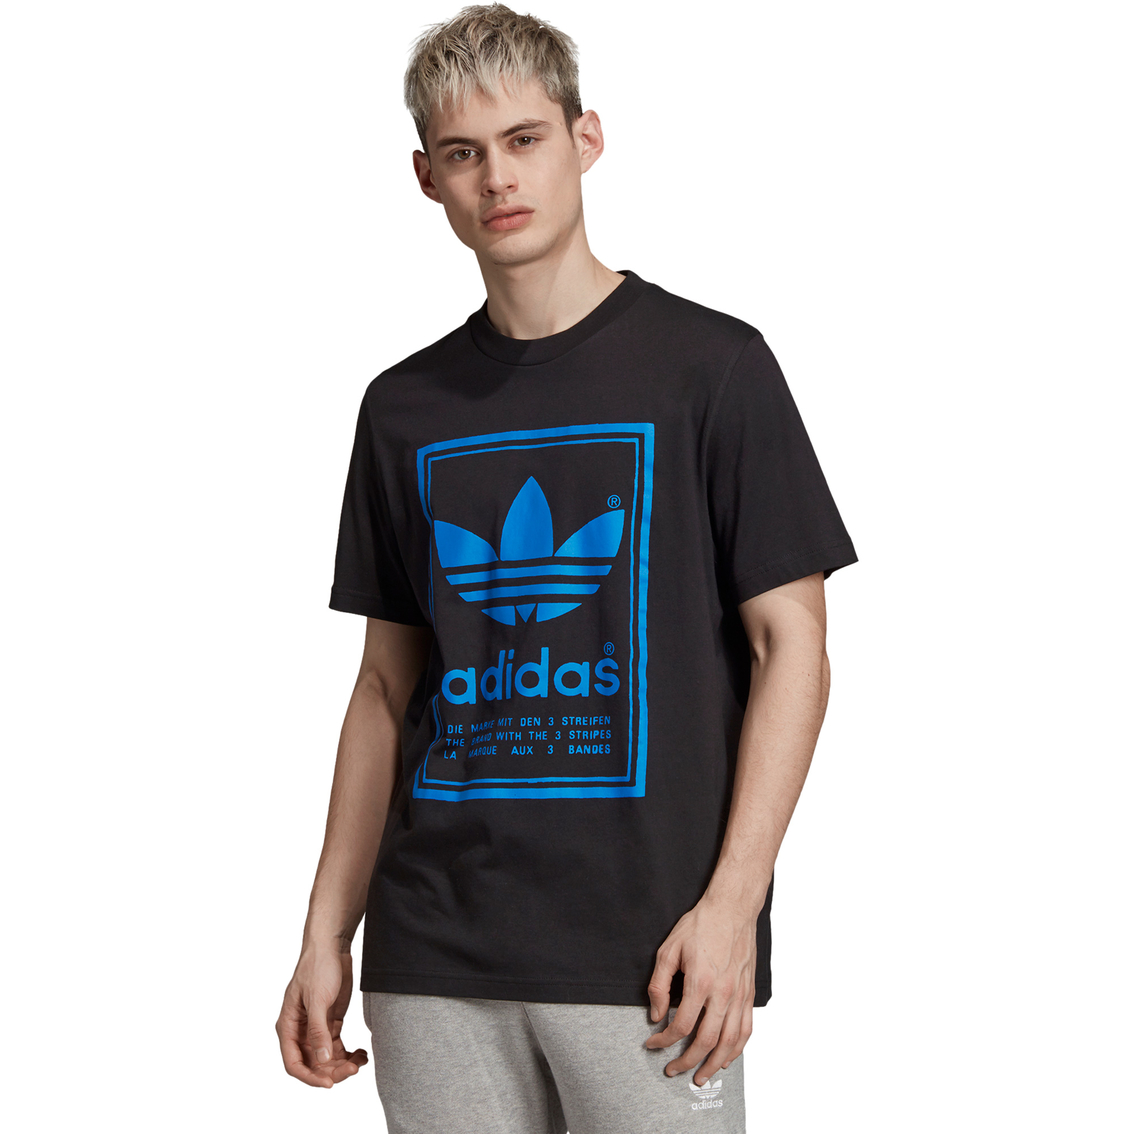 Adidas Vintage Tee | Shirts | Clothing & Accessories | Shop The Exchange